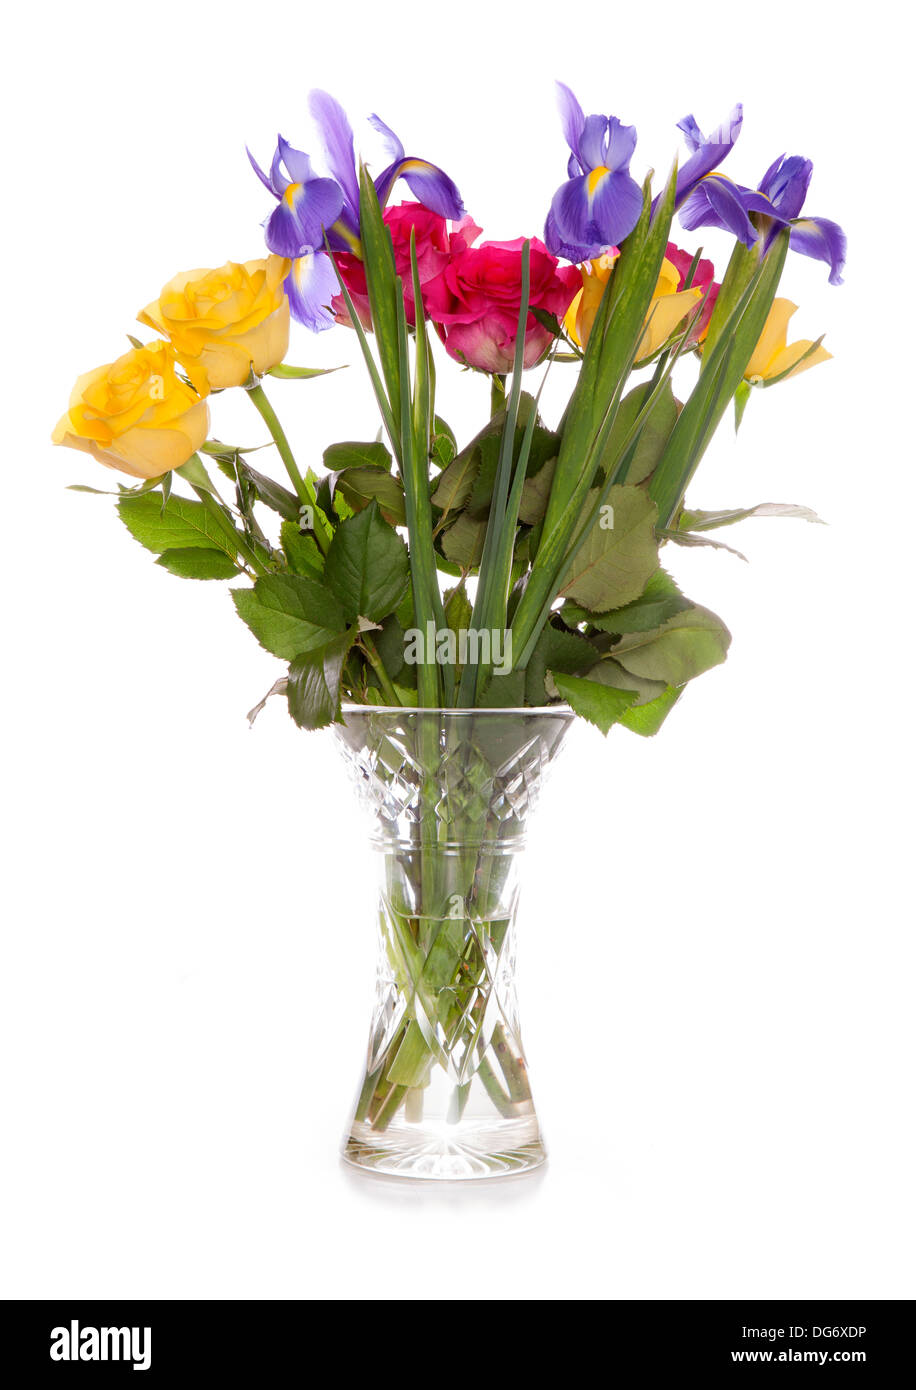 Bunch of flowers in a vase studio cutout Stock Photo